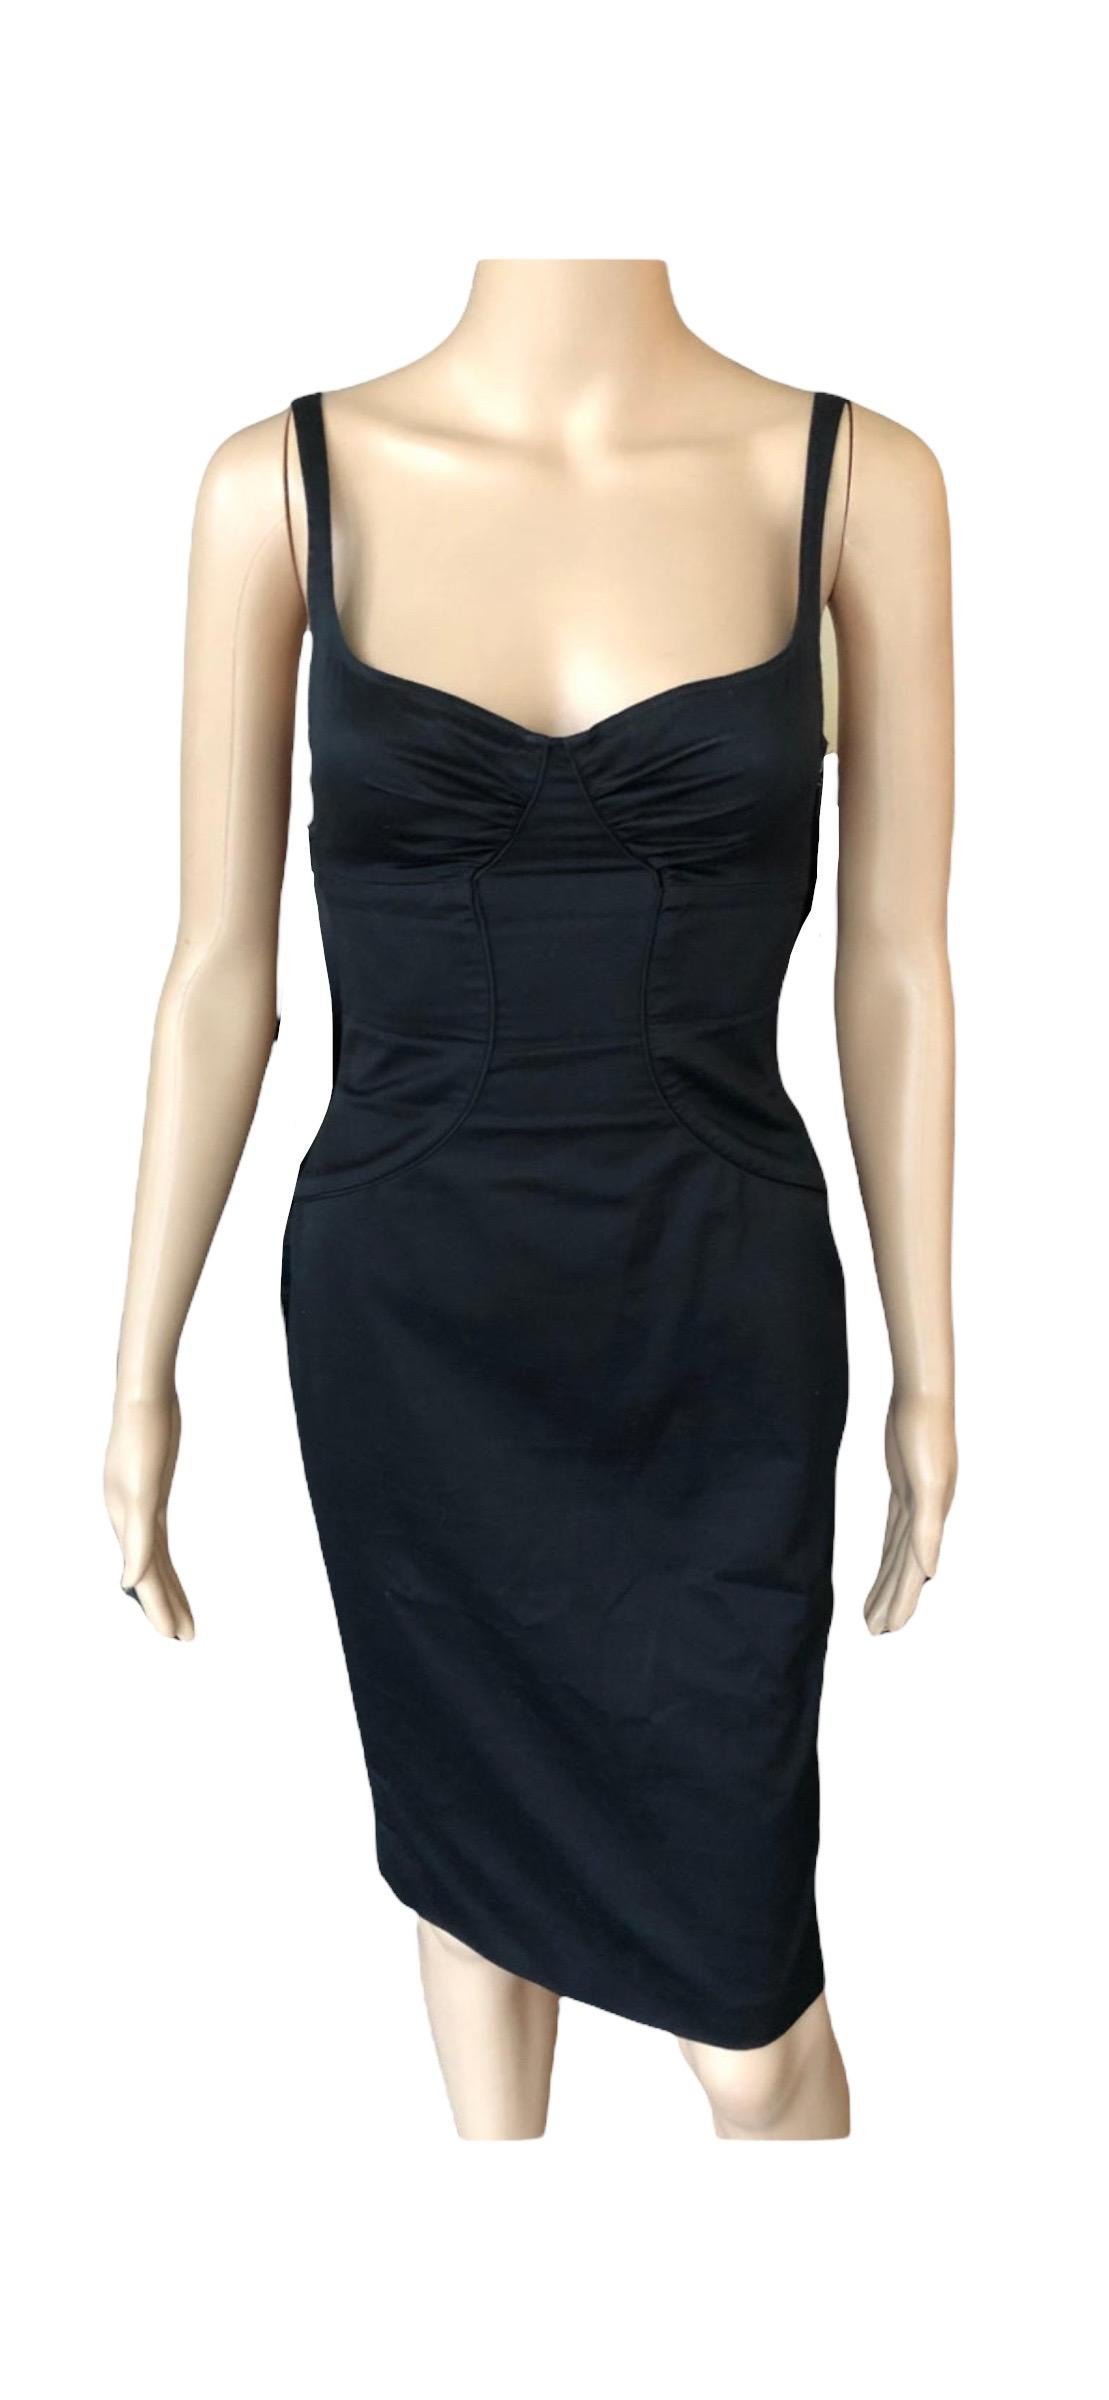 Tom Ford for Gucci 2003 Bustier Cutout Back Black Mini Dress 1